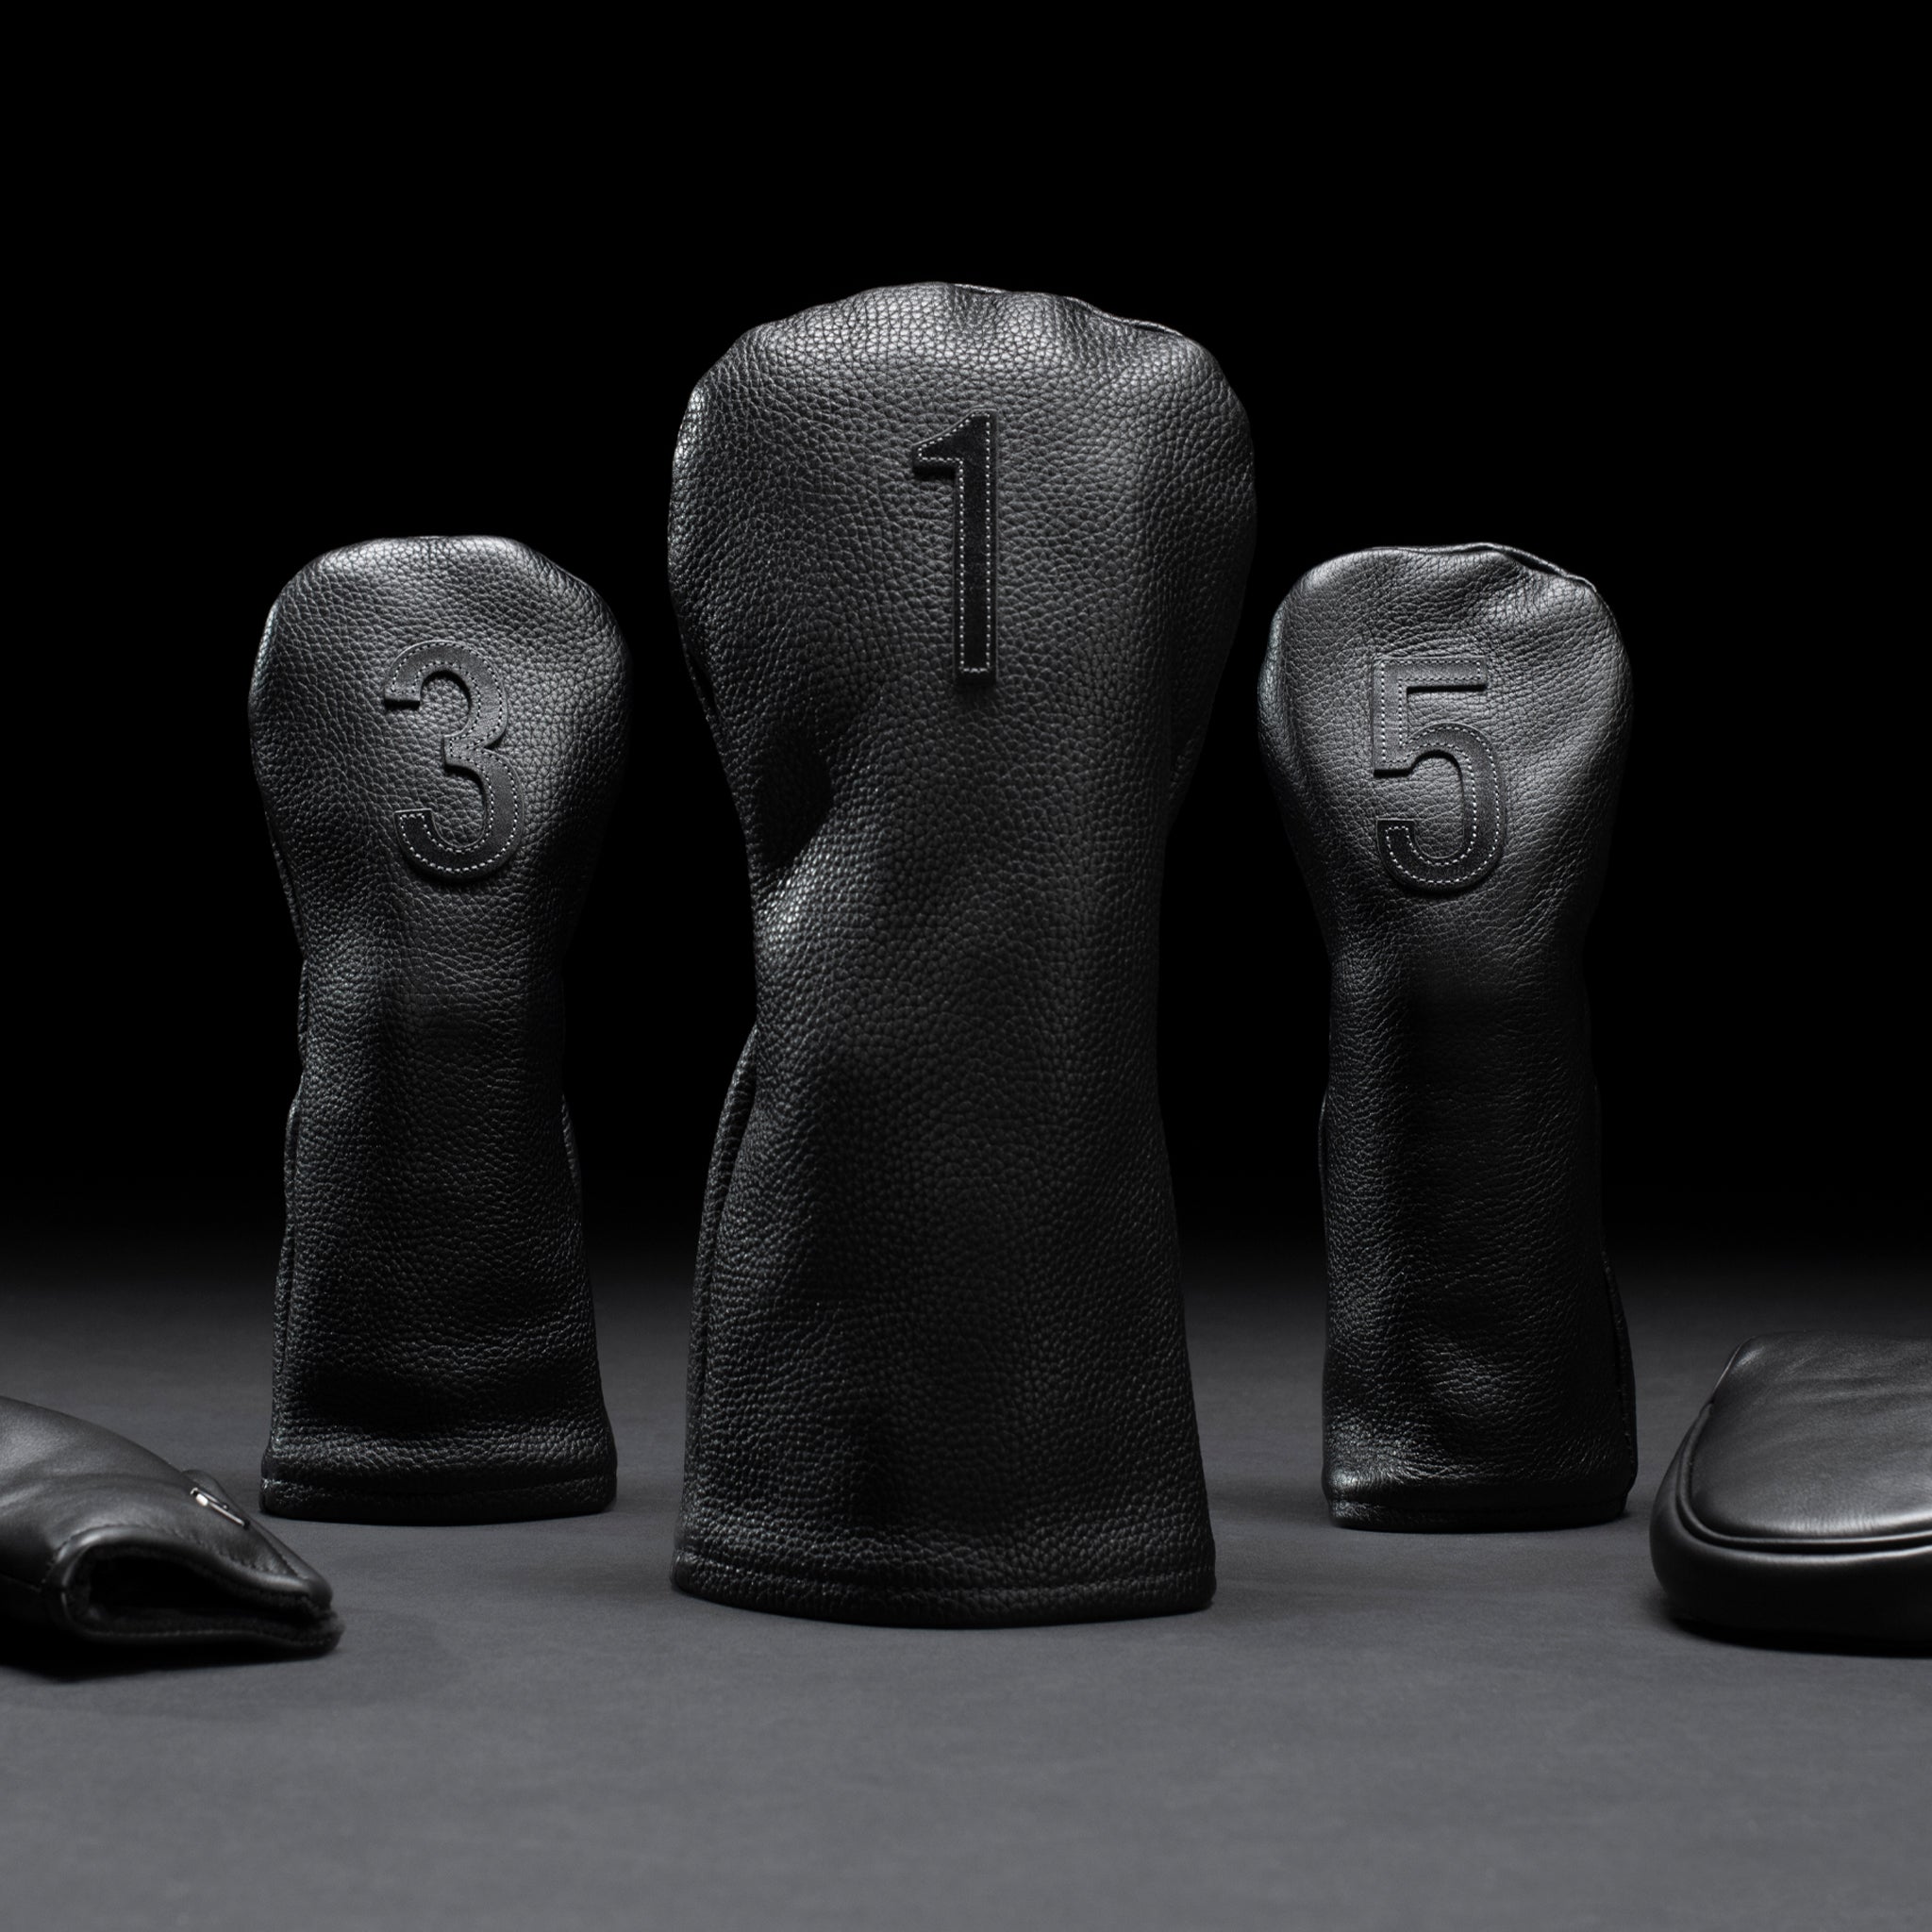 Three black golf headcovers propped up in black studio